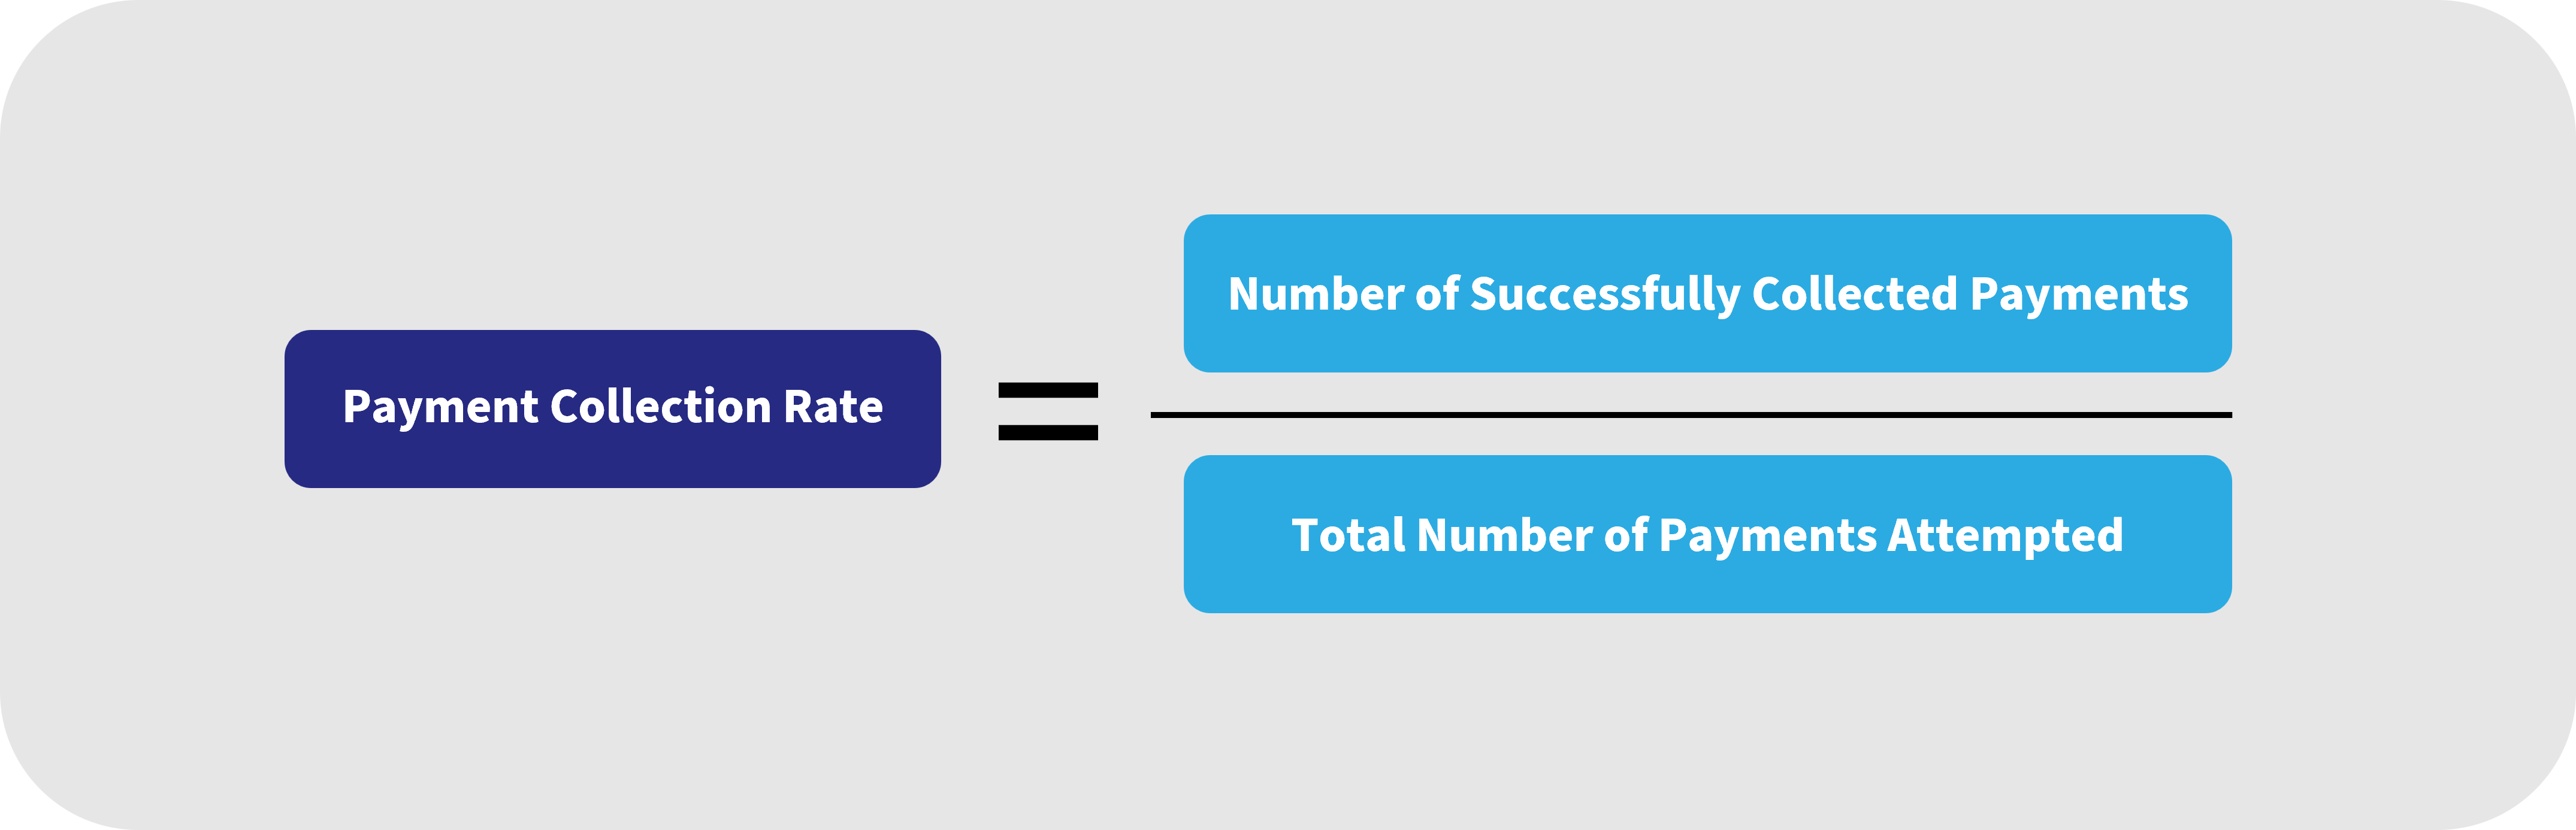 Payment Collection Rate = (Number of successfully collected payments) / (Total number of payments attempted)